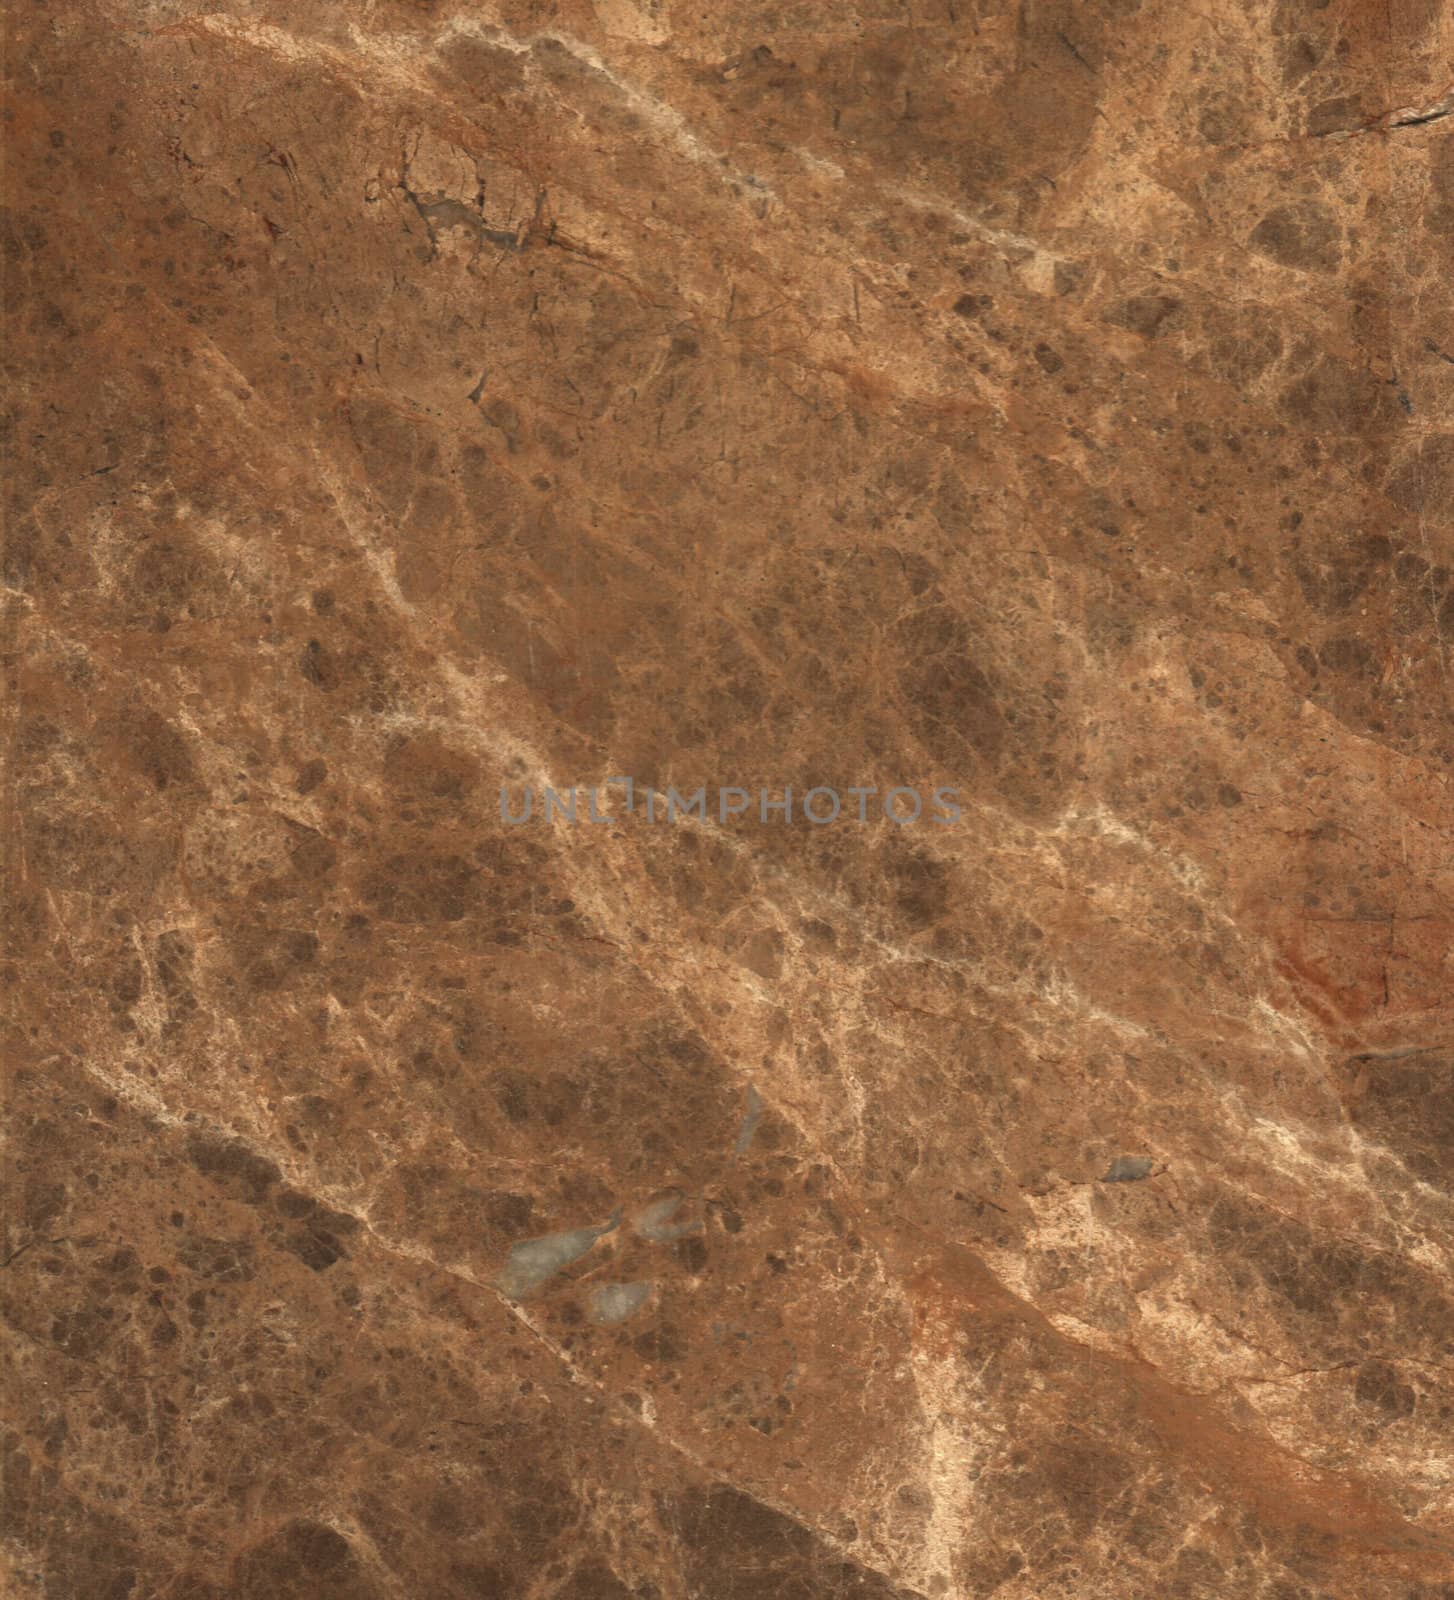 Brown marble texture background (High resolution scan)